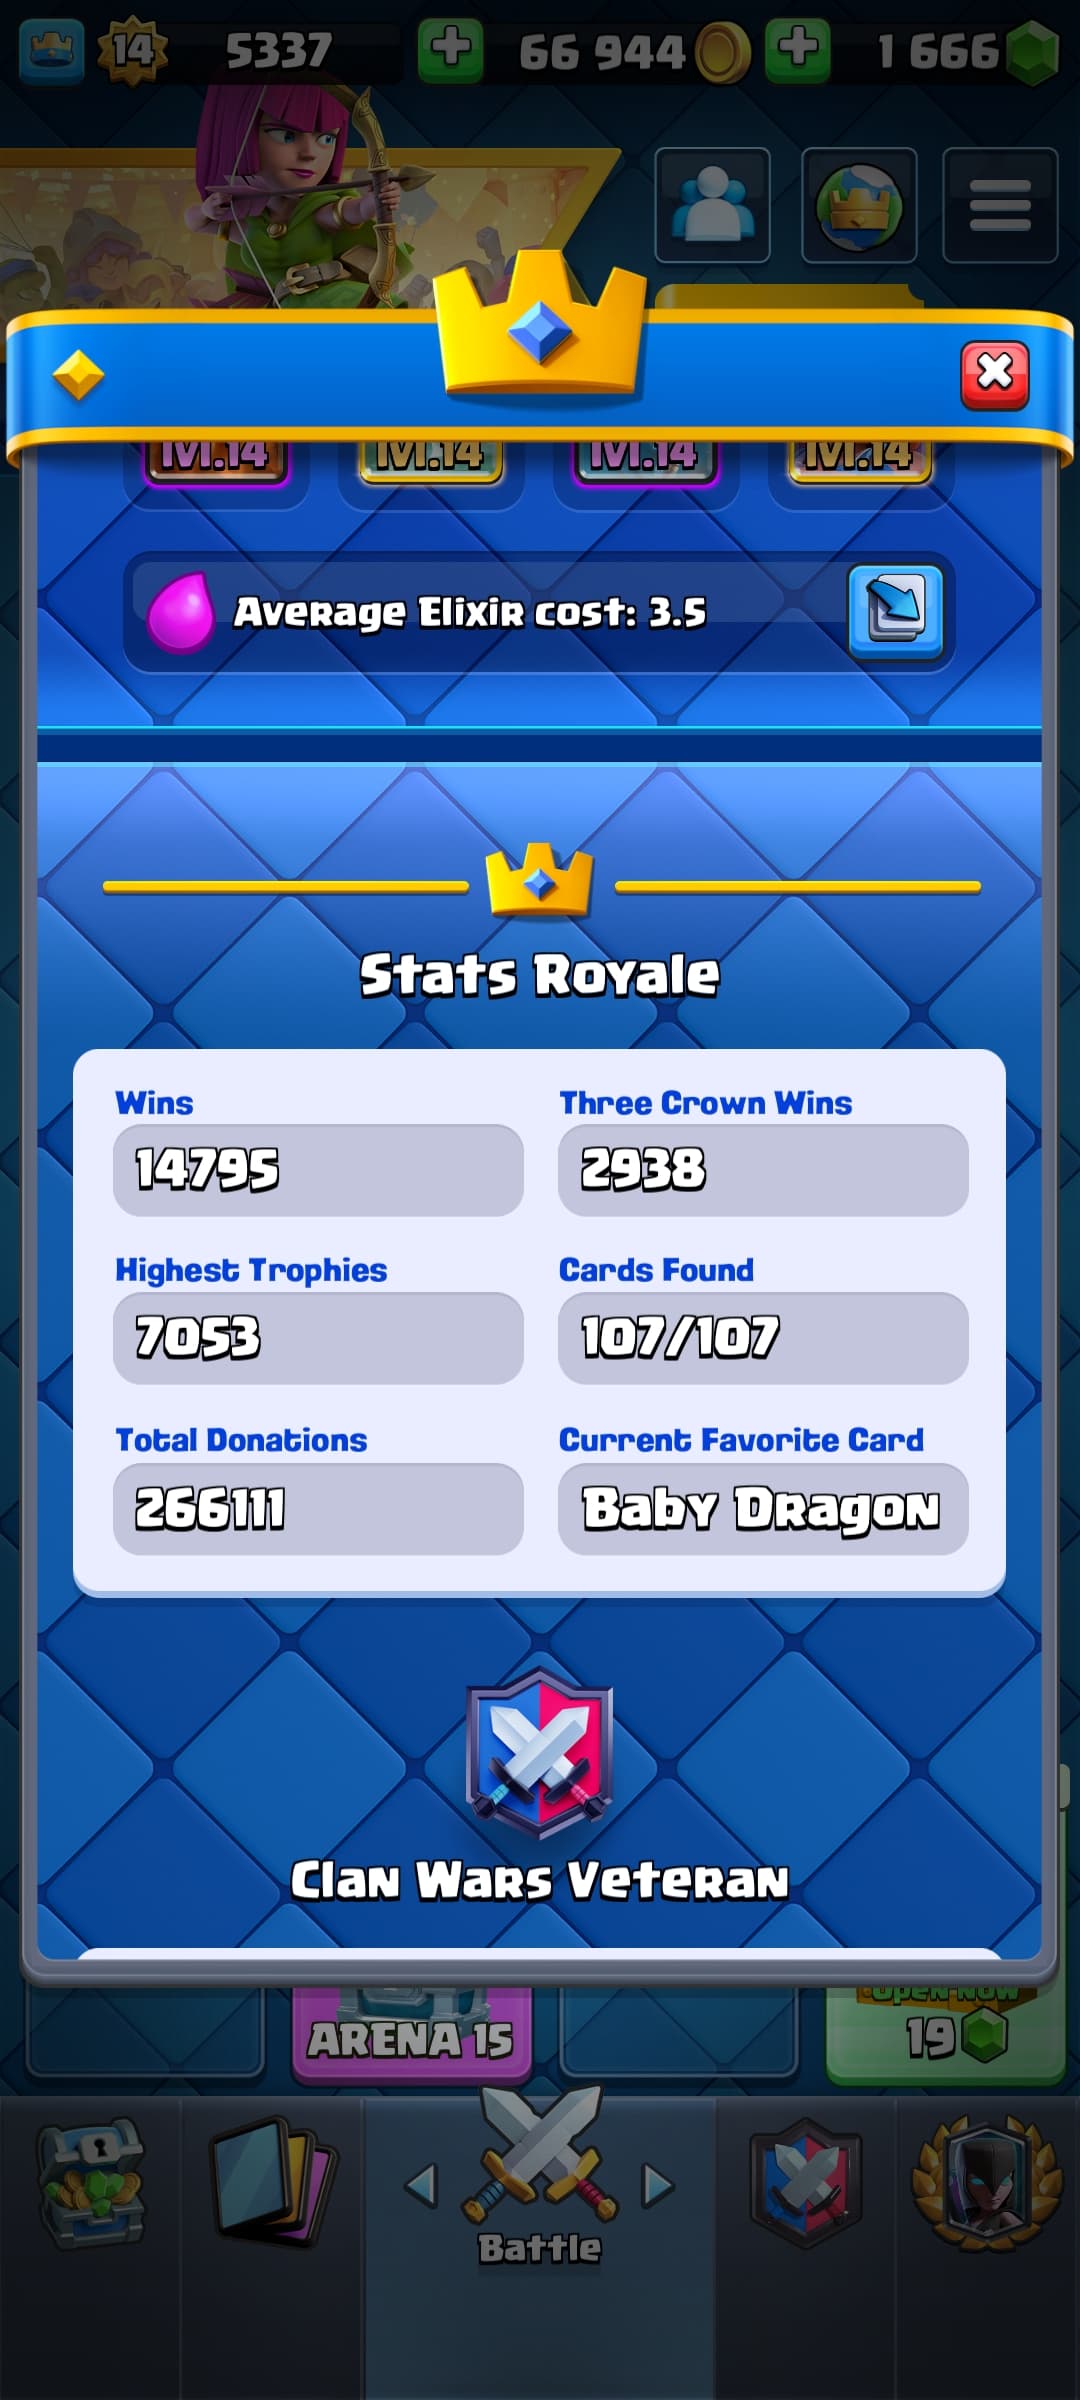 Stumped on arena 6. Can't get passed 1700 trophies. Any updated